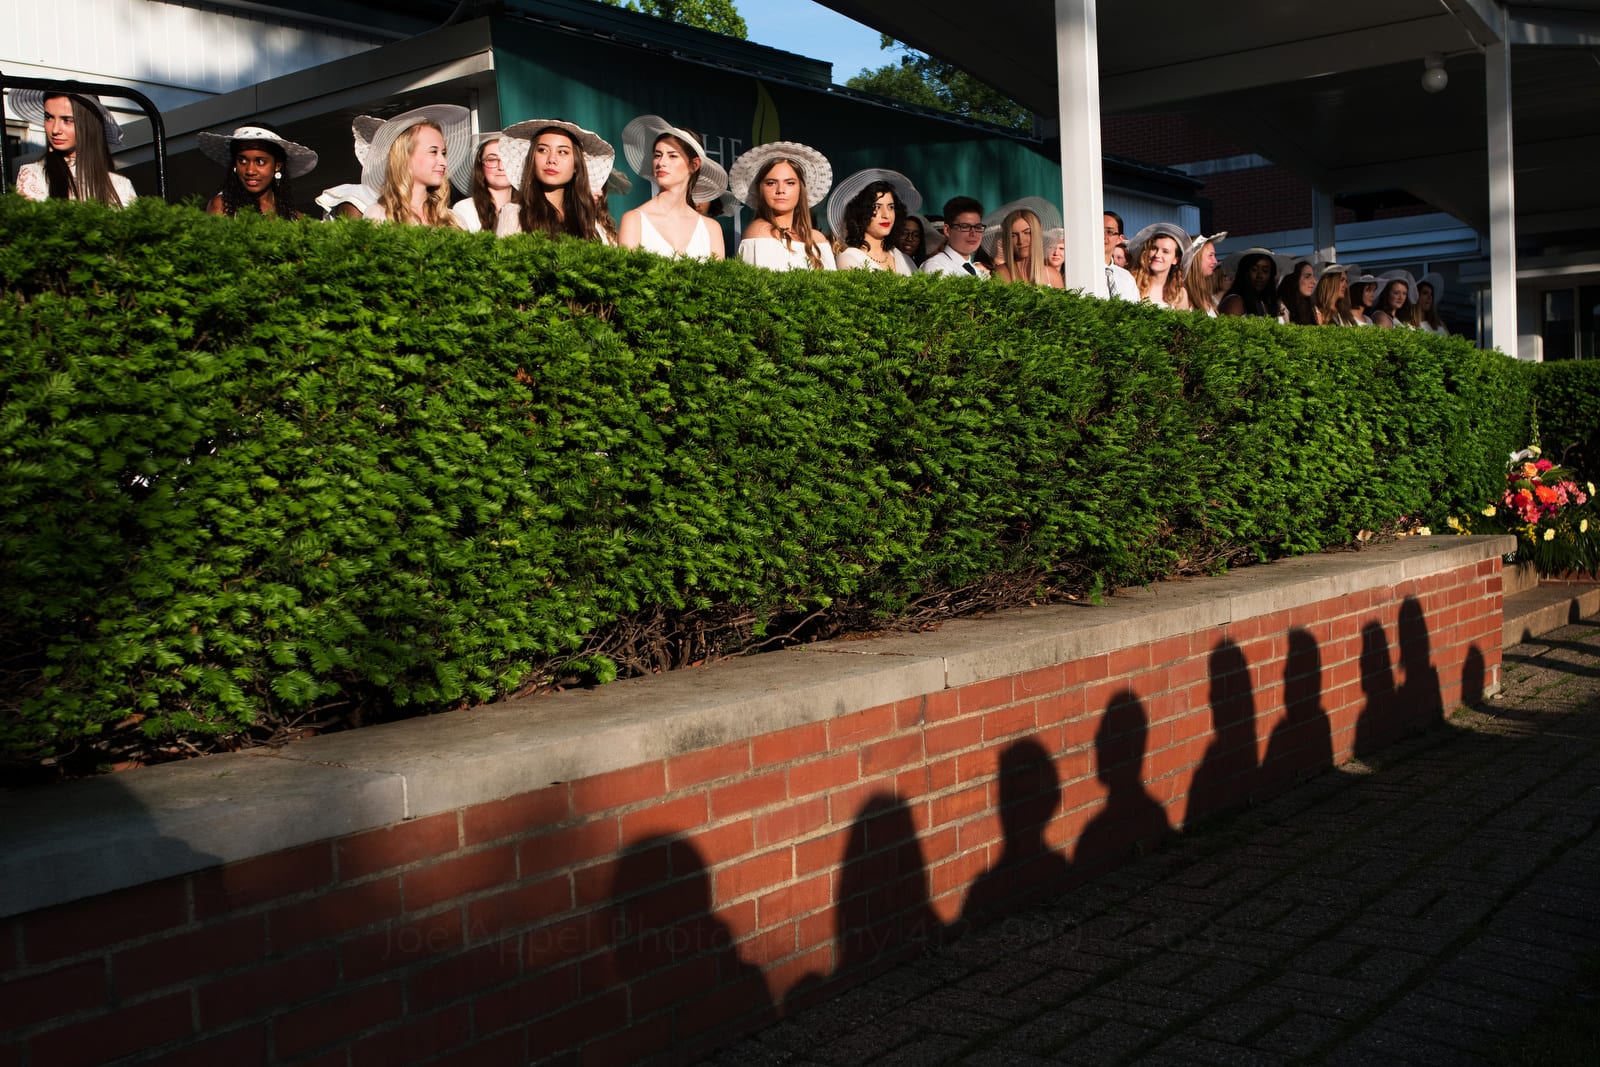 Pittsburgh editorial event photographer covers graduation ceremony at an all-girls school. Shadows of their parents appear on the brick wall beneath green hedges. The girls sit above.